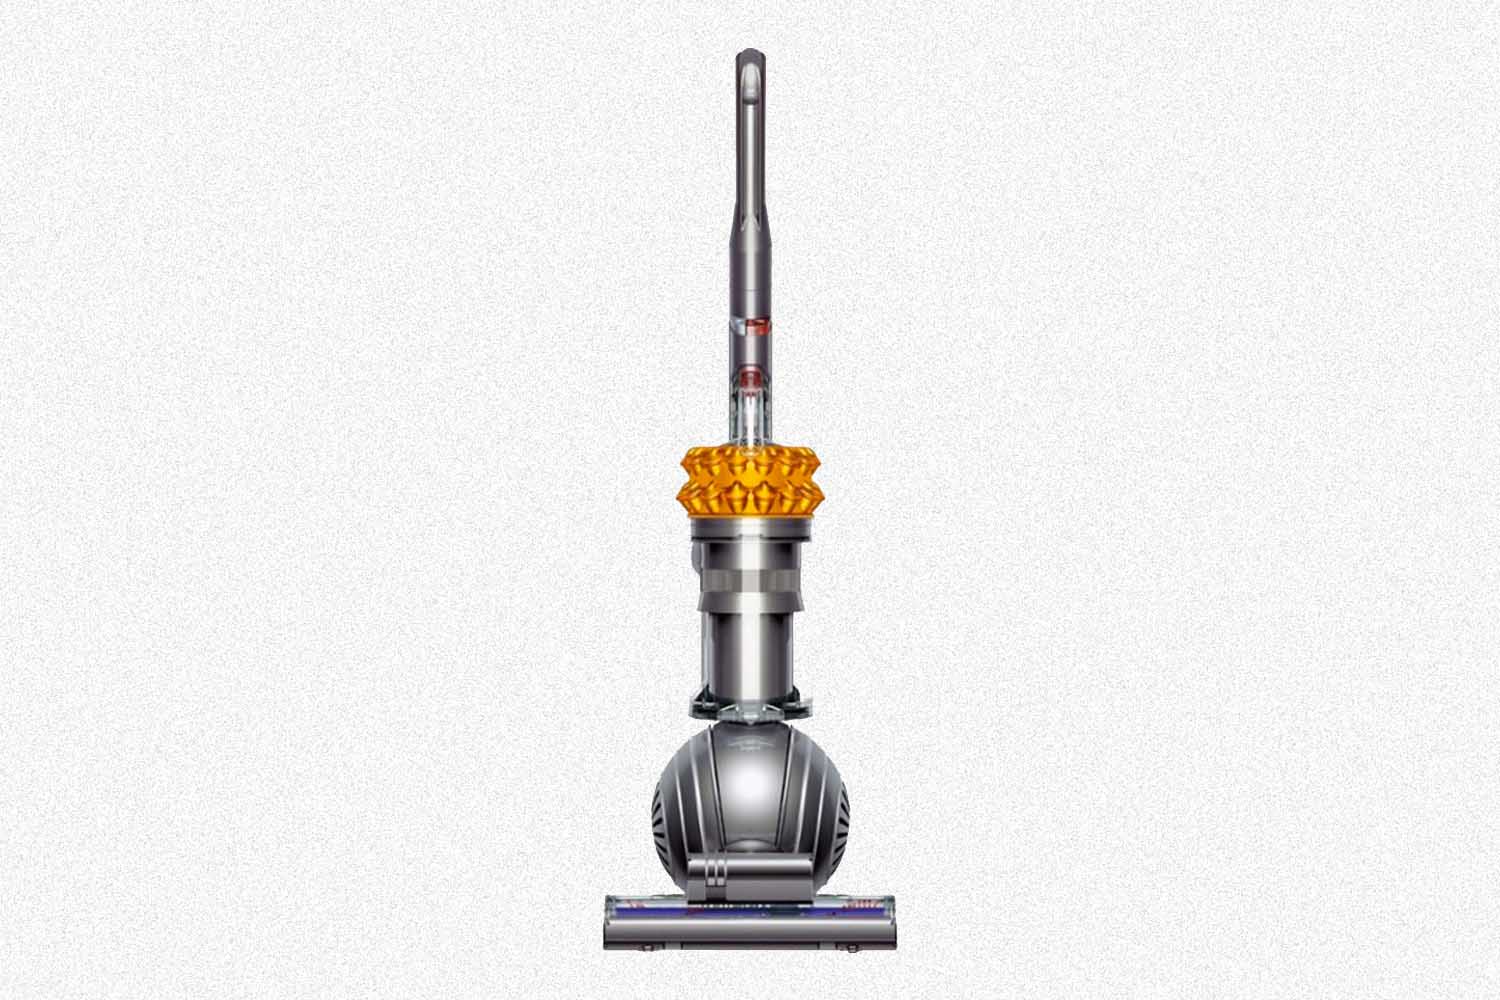 Deal: Dyson’s Cinetic Bagless Upright Vacuum Is $250 Off